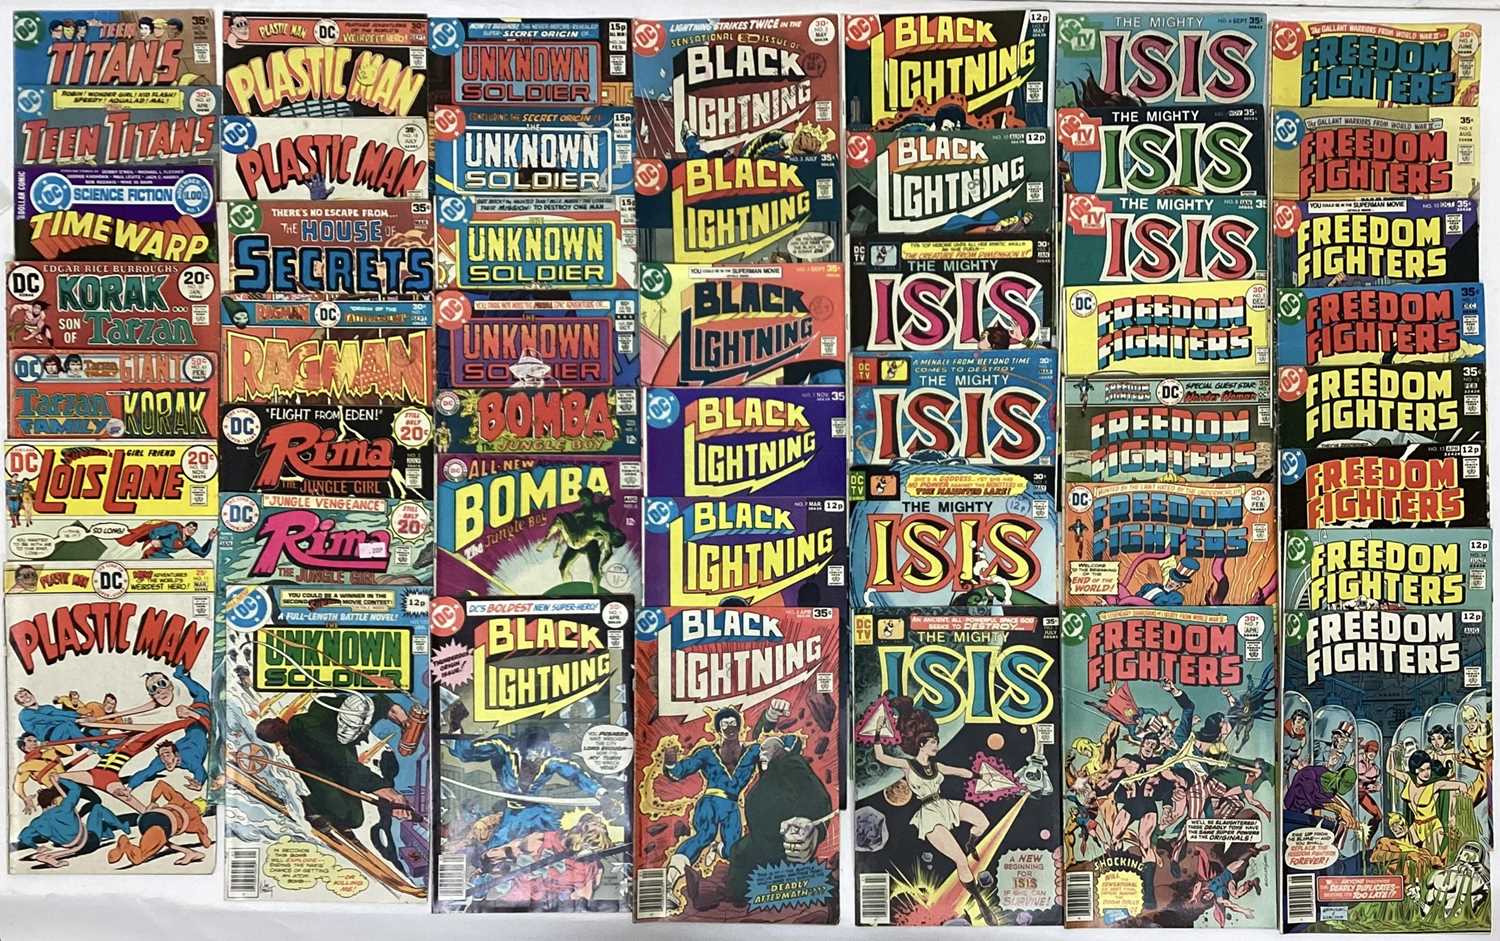 Lot 140 - Large quantity of mostly 1970's DC Comics to include Freedom fighters, Karate Kid, Black Orchid 1973, #428 #429 #430. Origin and first appearance of Black Orchid and others